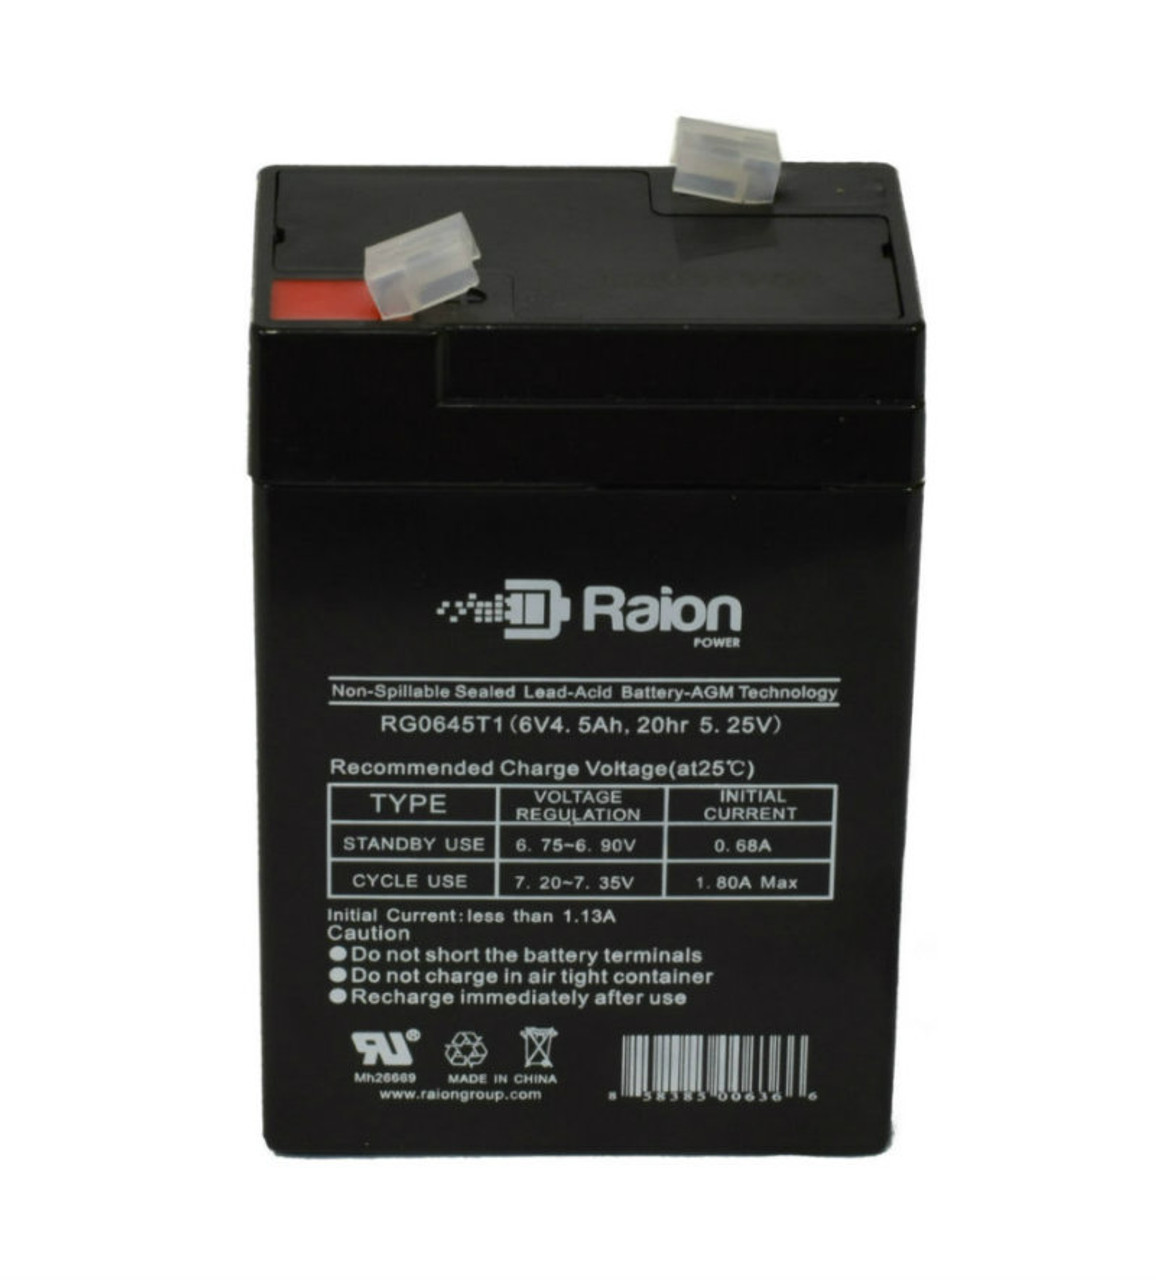 Raion Power RG0645T1 Replacement Battery Cartridge for SunStone Power SPT6-4.5